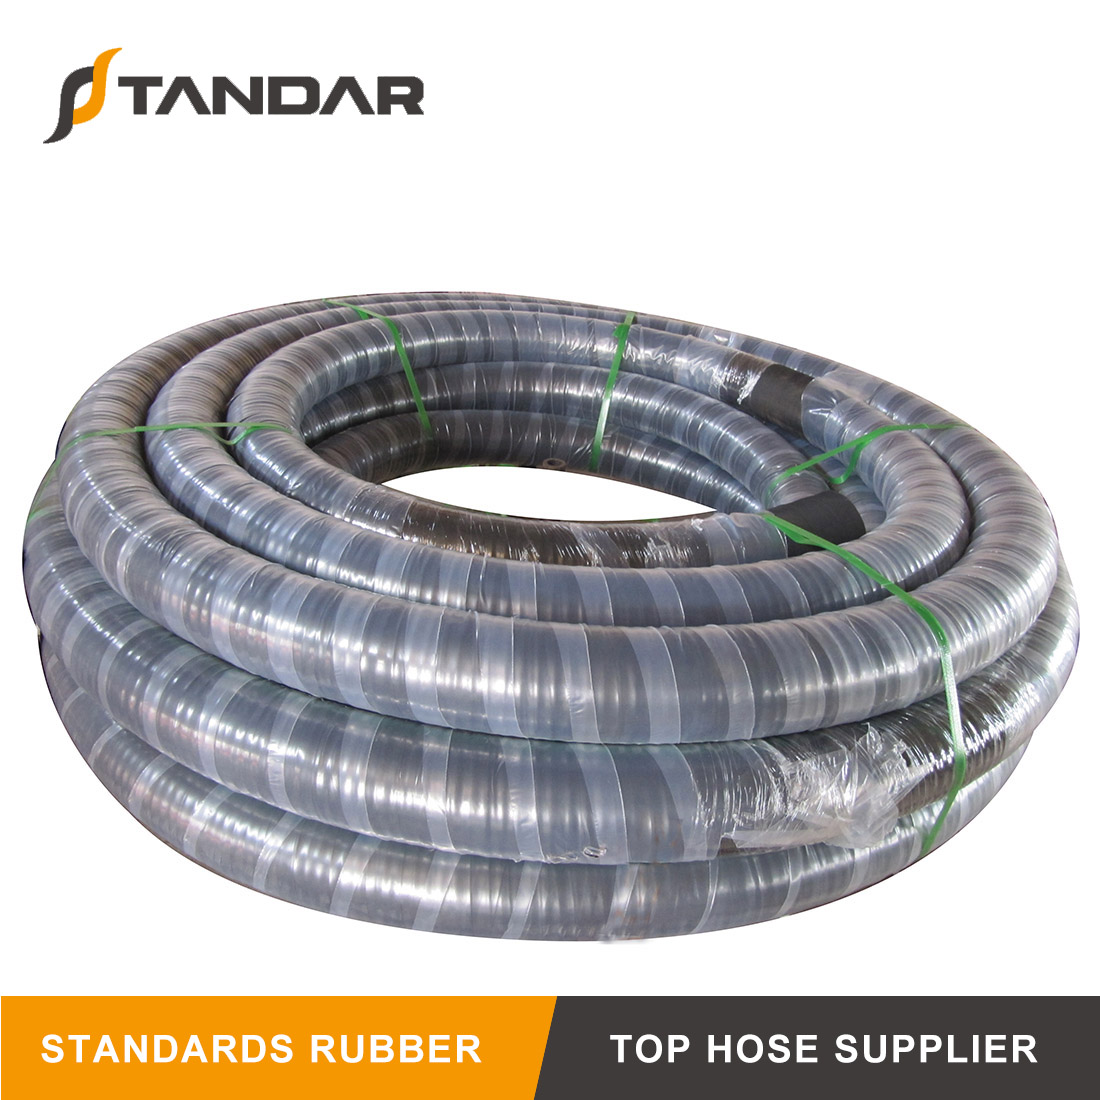 150 PSI Industrial Water Suction Discharge Hose